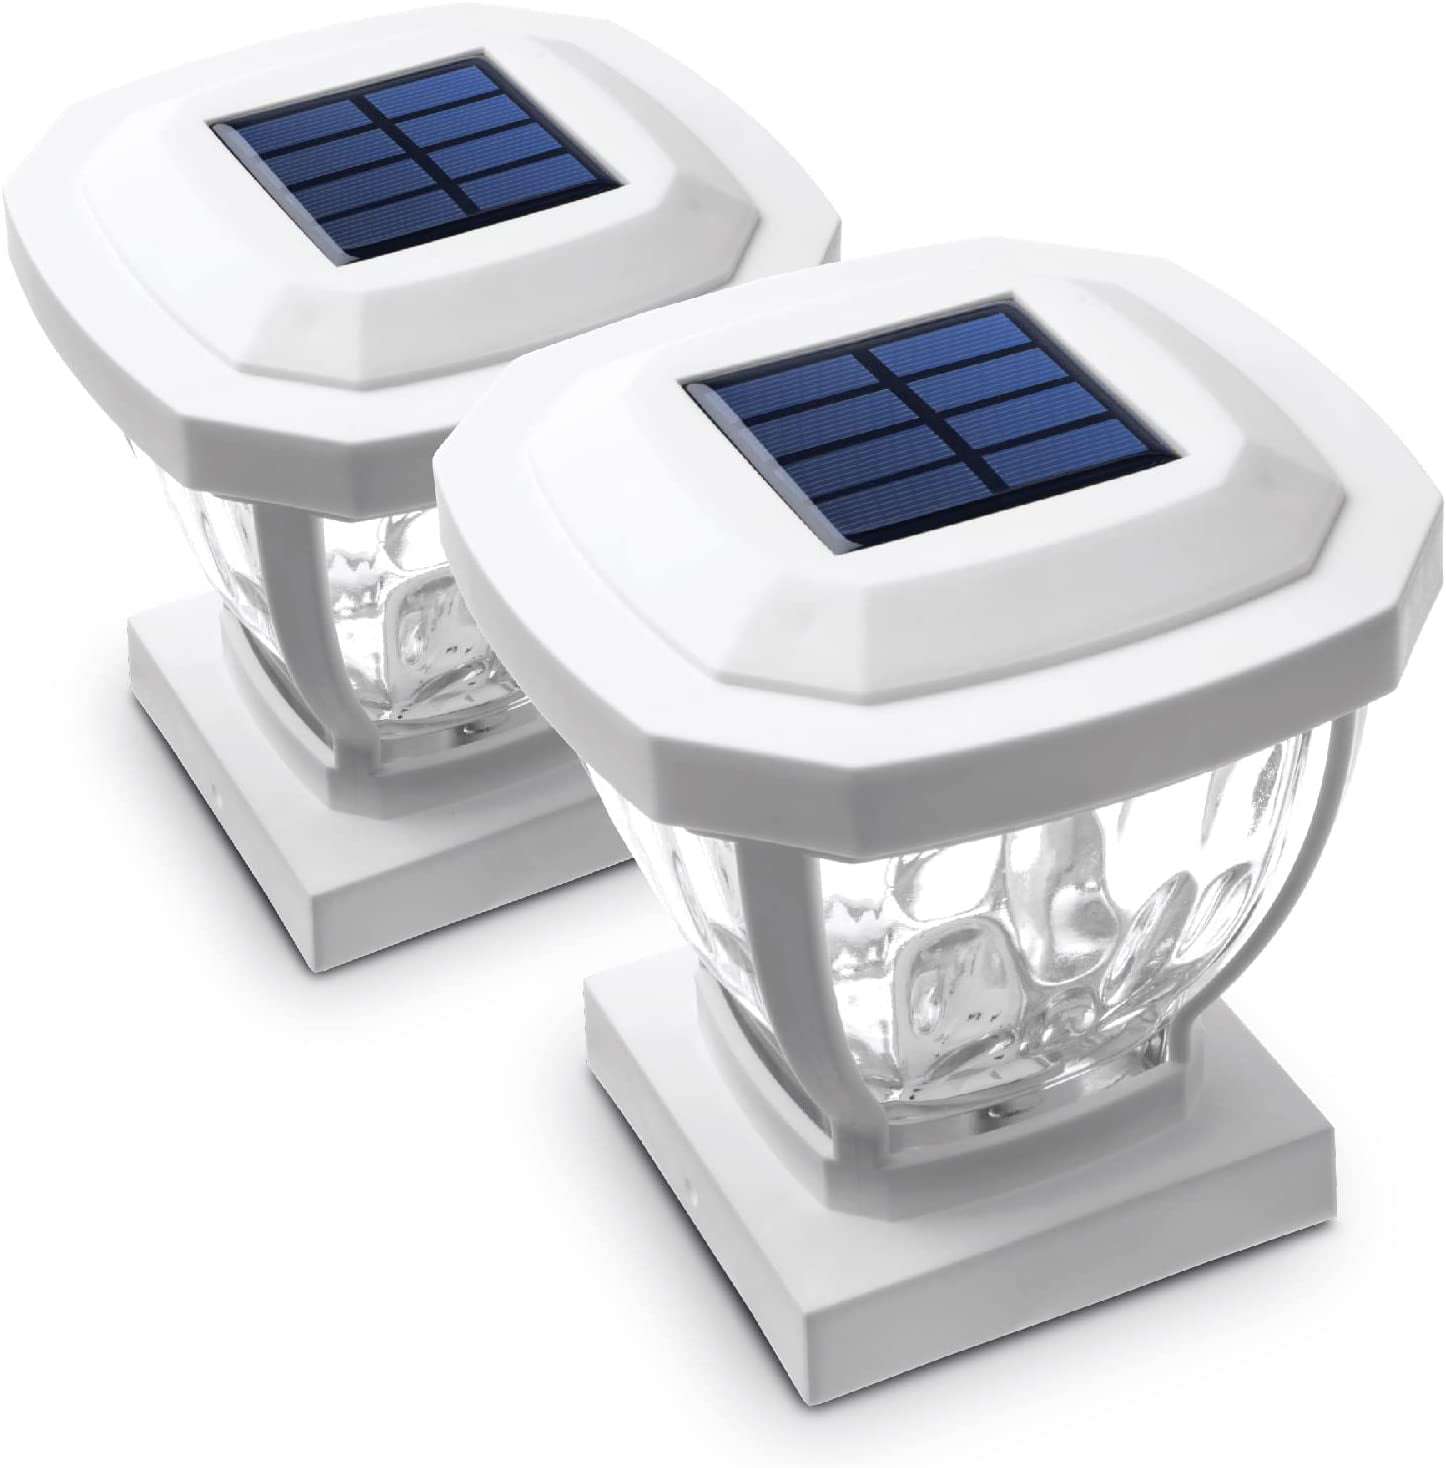 Zone Security Solar Cap - LED 4x4 (3.5 x 3.5 in.) Post Lights, White, 2-Pack - Walmart.com